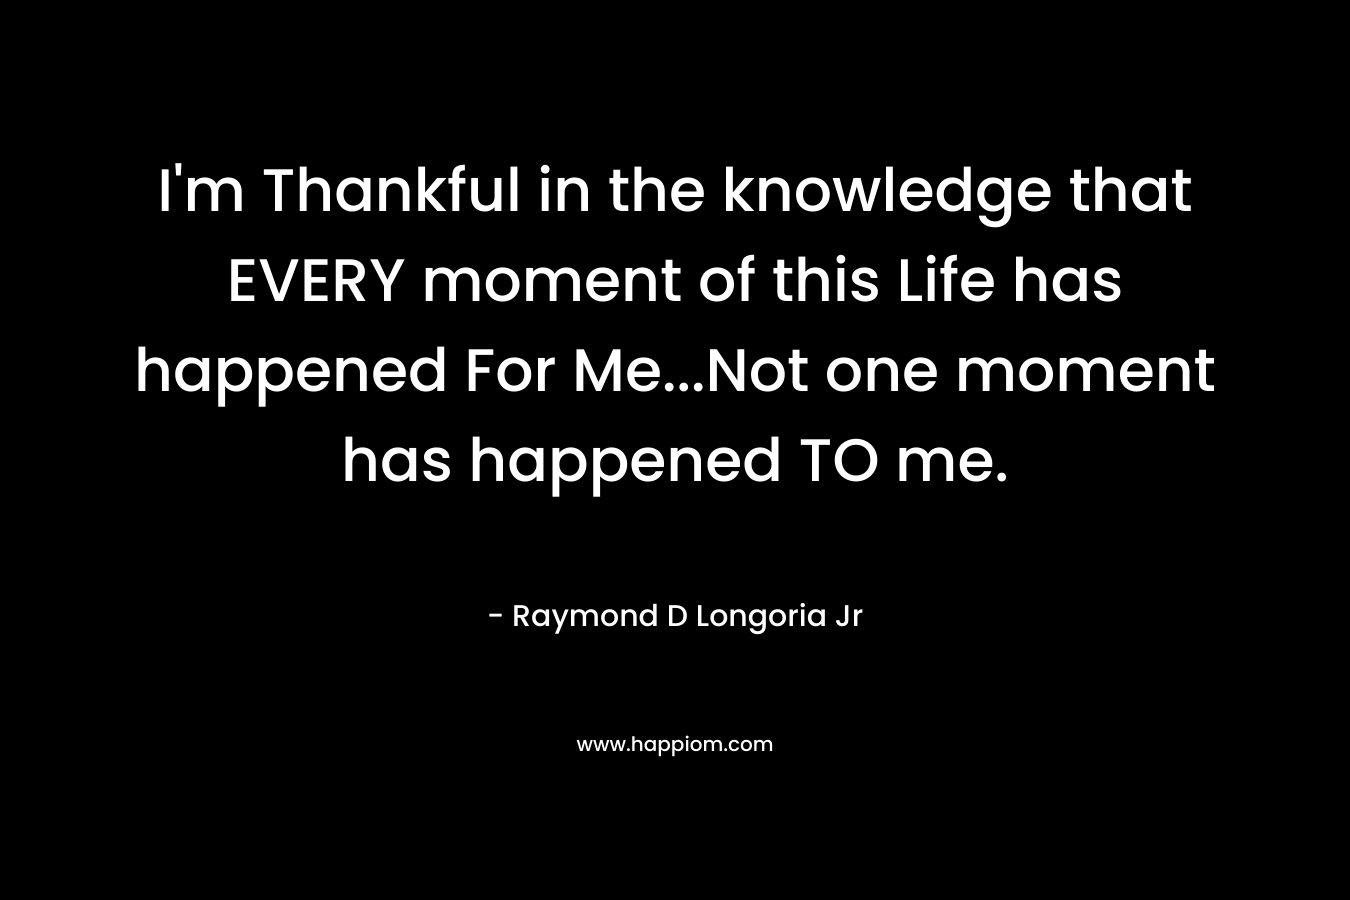 I'm Thankful in the knowledge that EVERY moment of this Life has happened For Me...Not one moment has happened TO me.